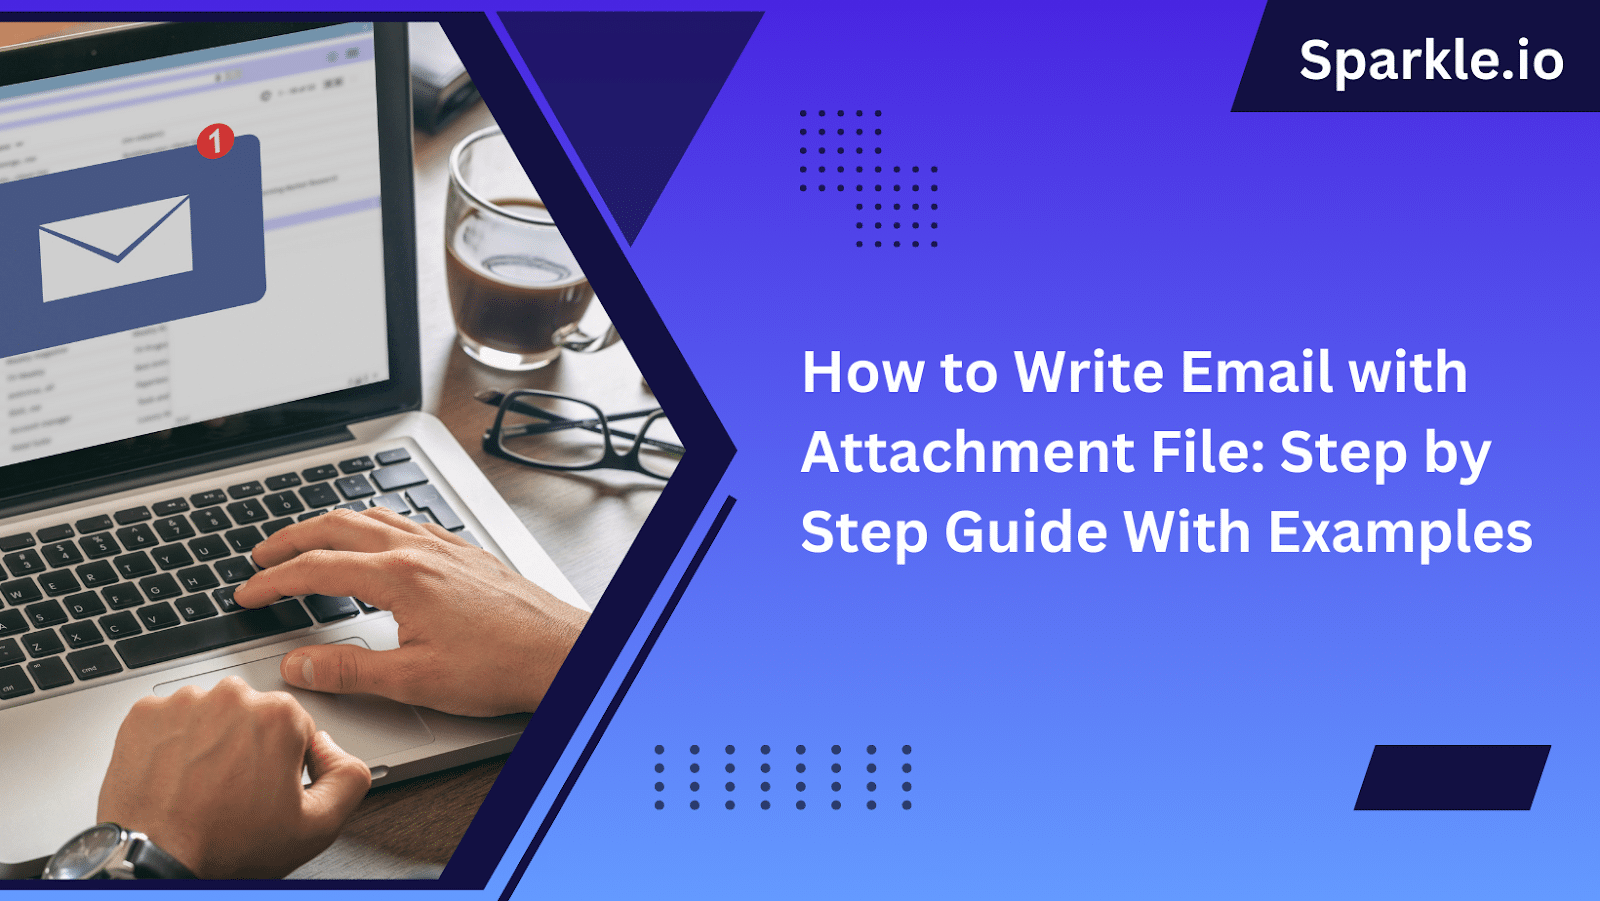 How to Write Email with Attachment File: Step by Step Guide With Examples